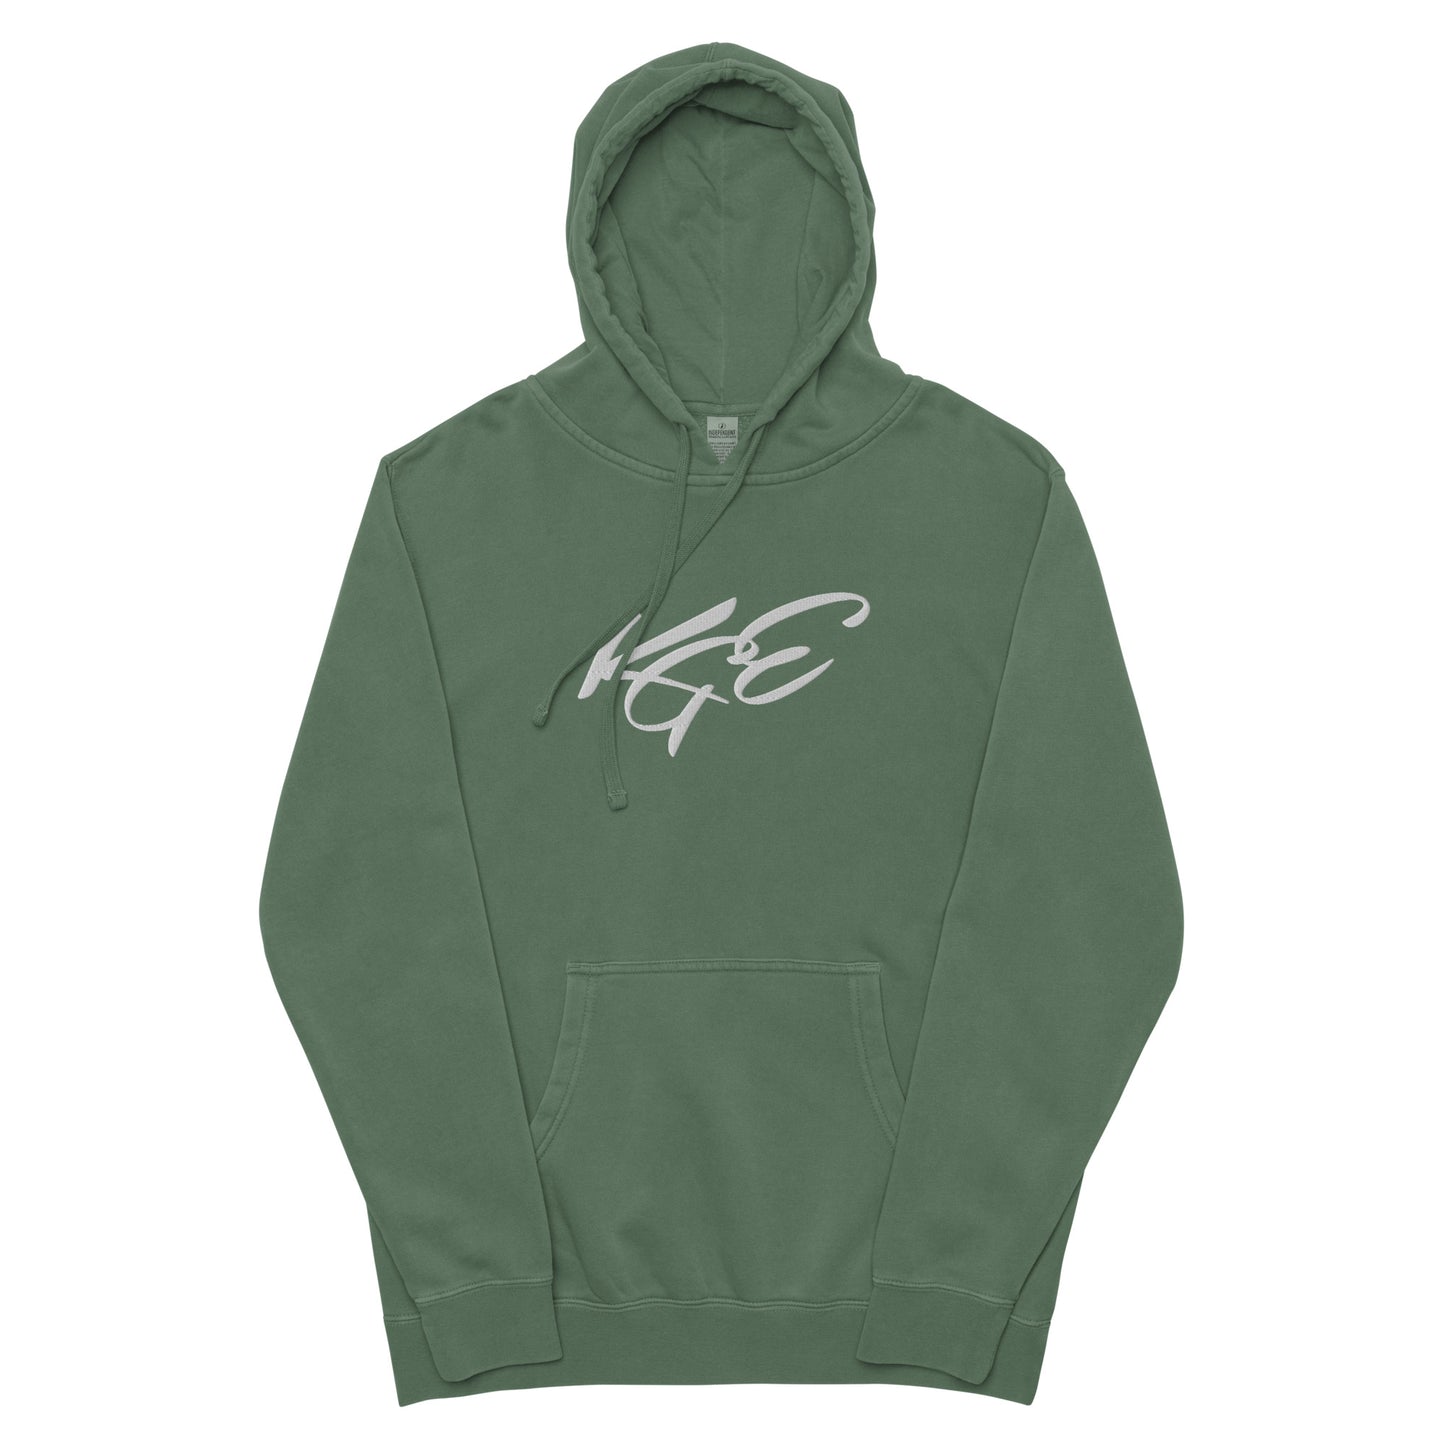 (New) KGE Signature Pigment-Dyed Hoodie | Independent Trading Co